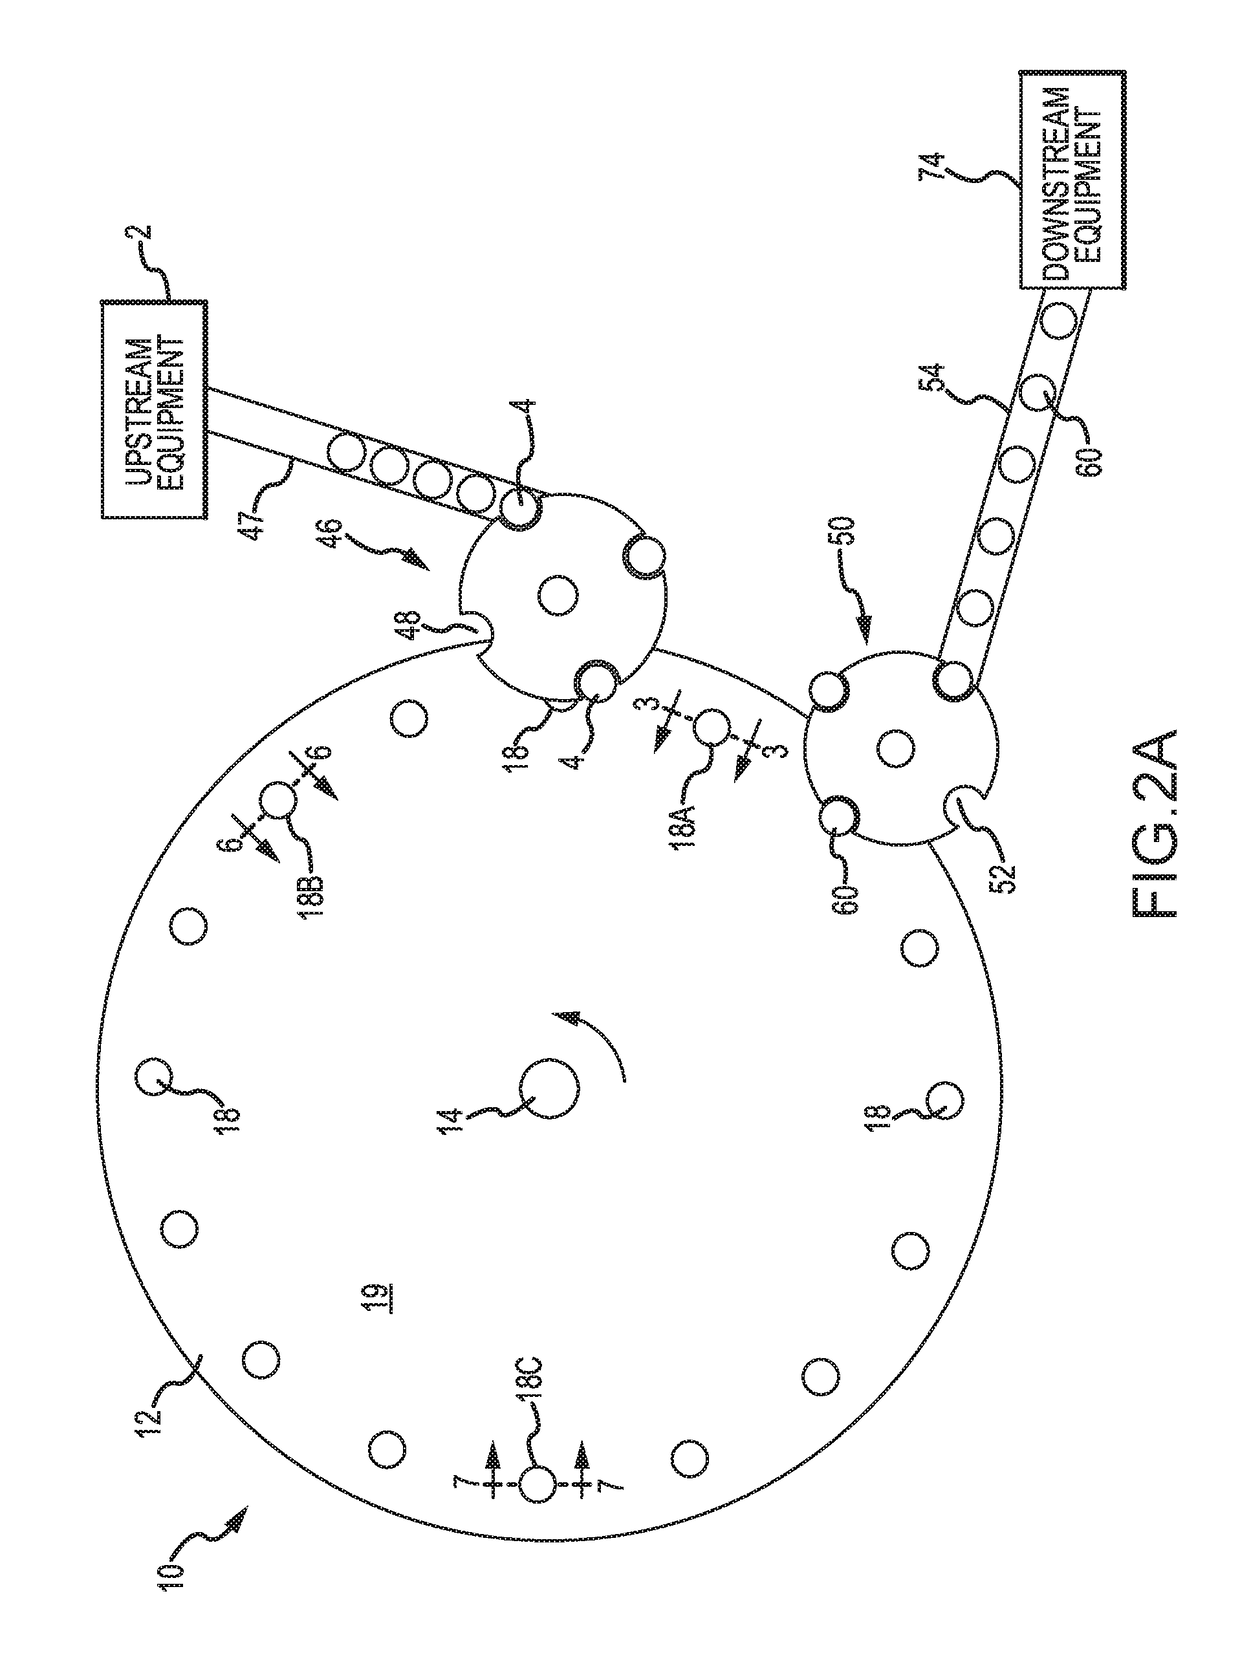 Method and apparatus of forming a deboss in a closed end of a metallic cup